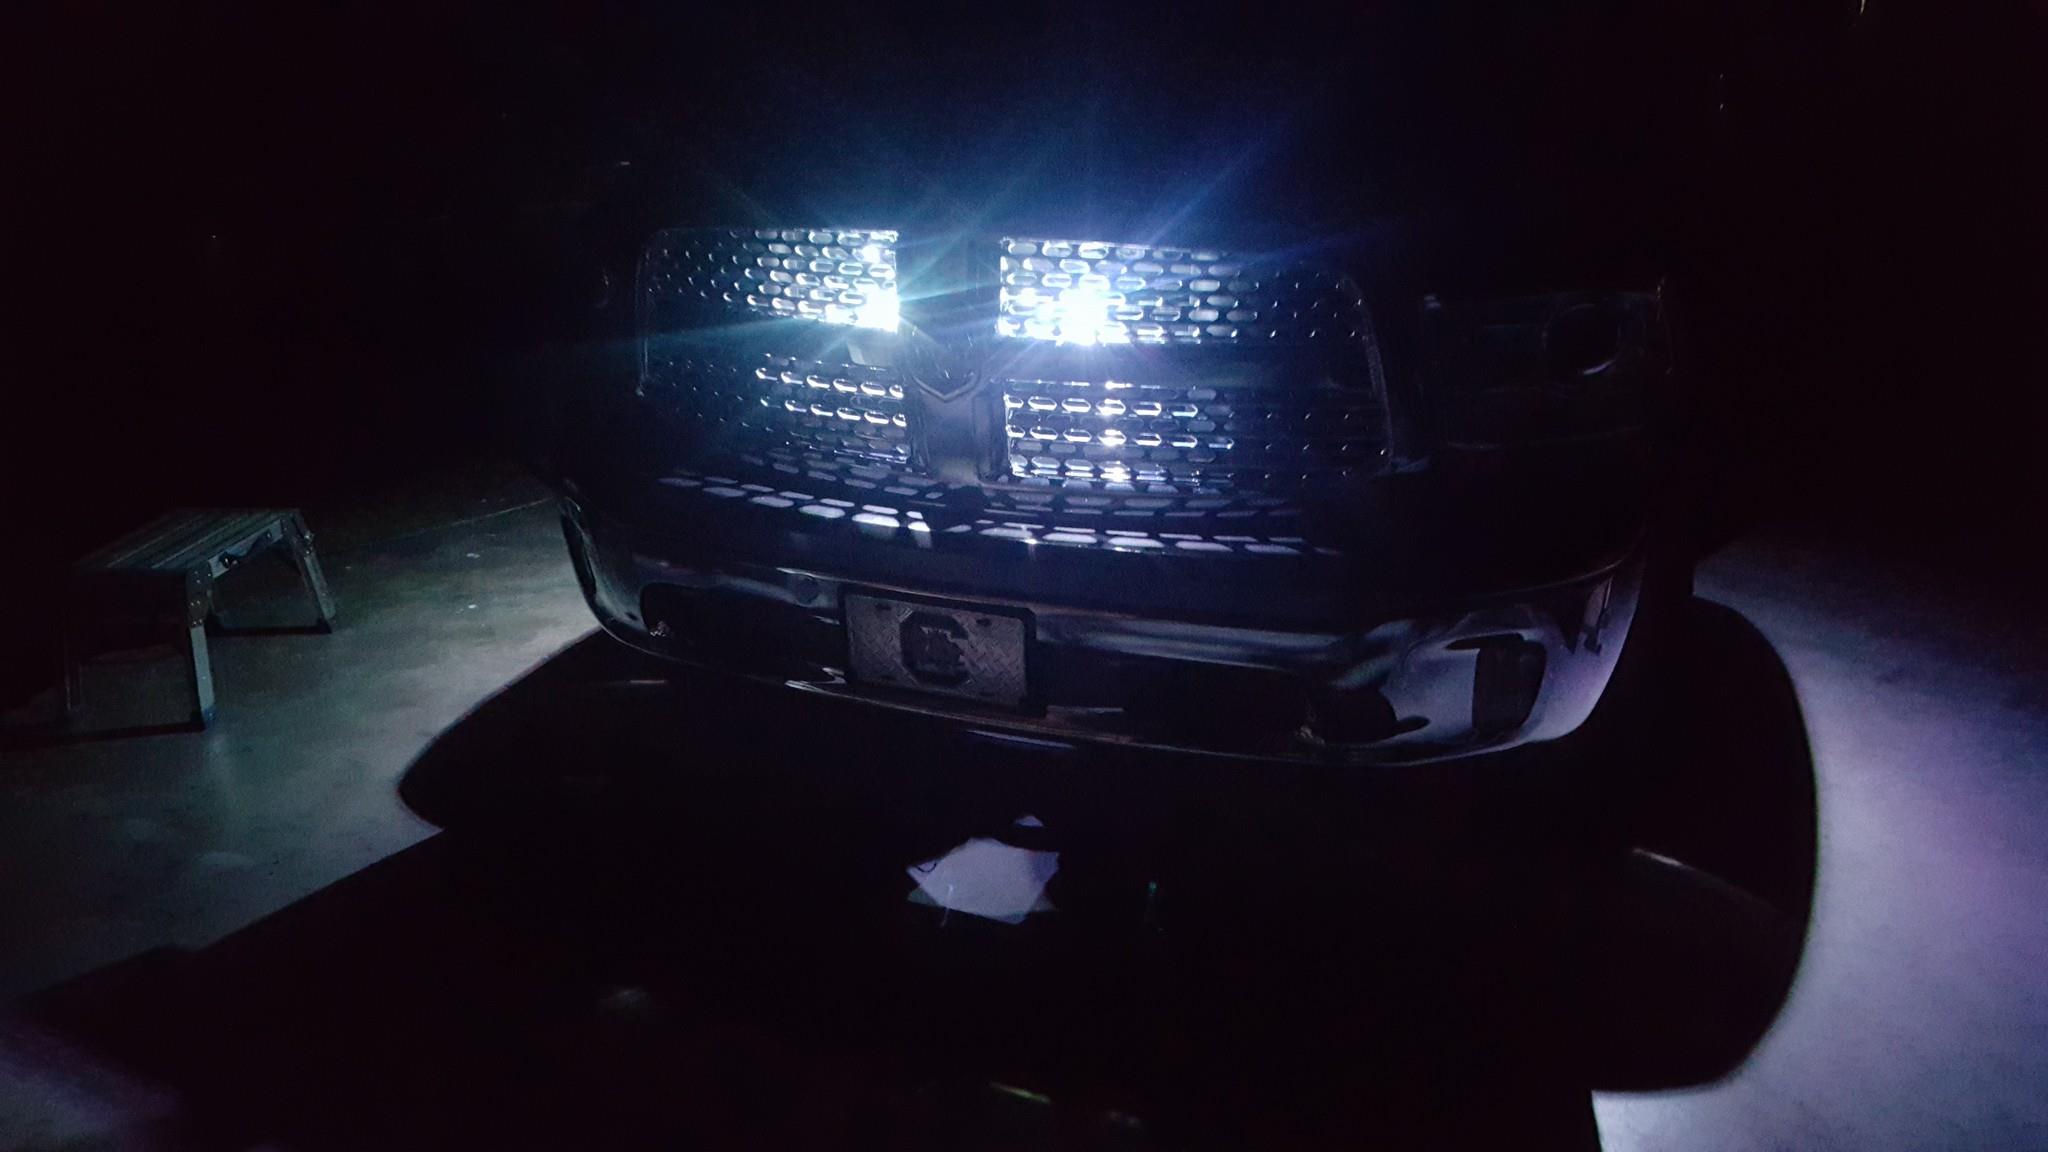 Photo of LED lights installed behind the grille of a Dodge Ram.